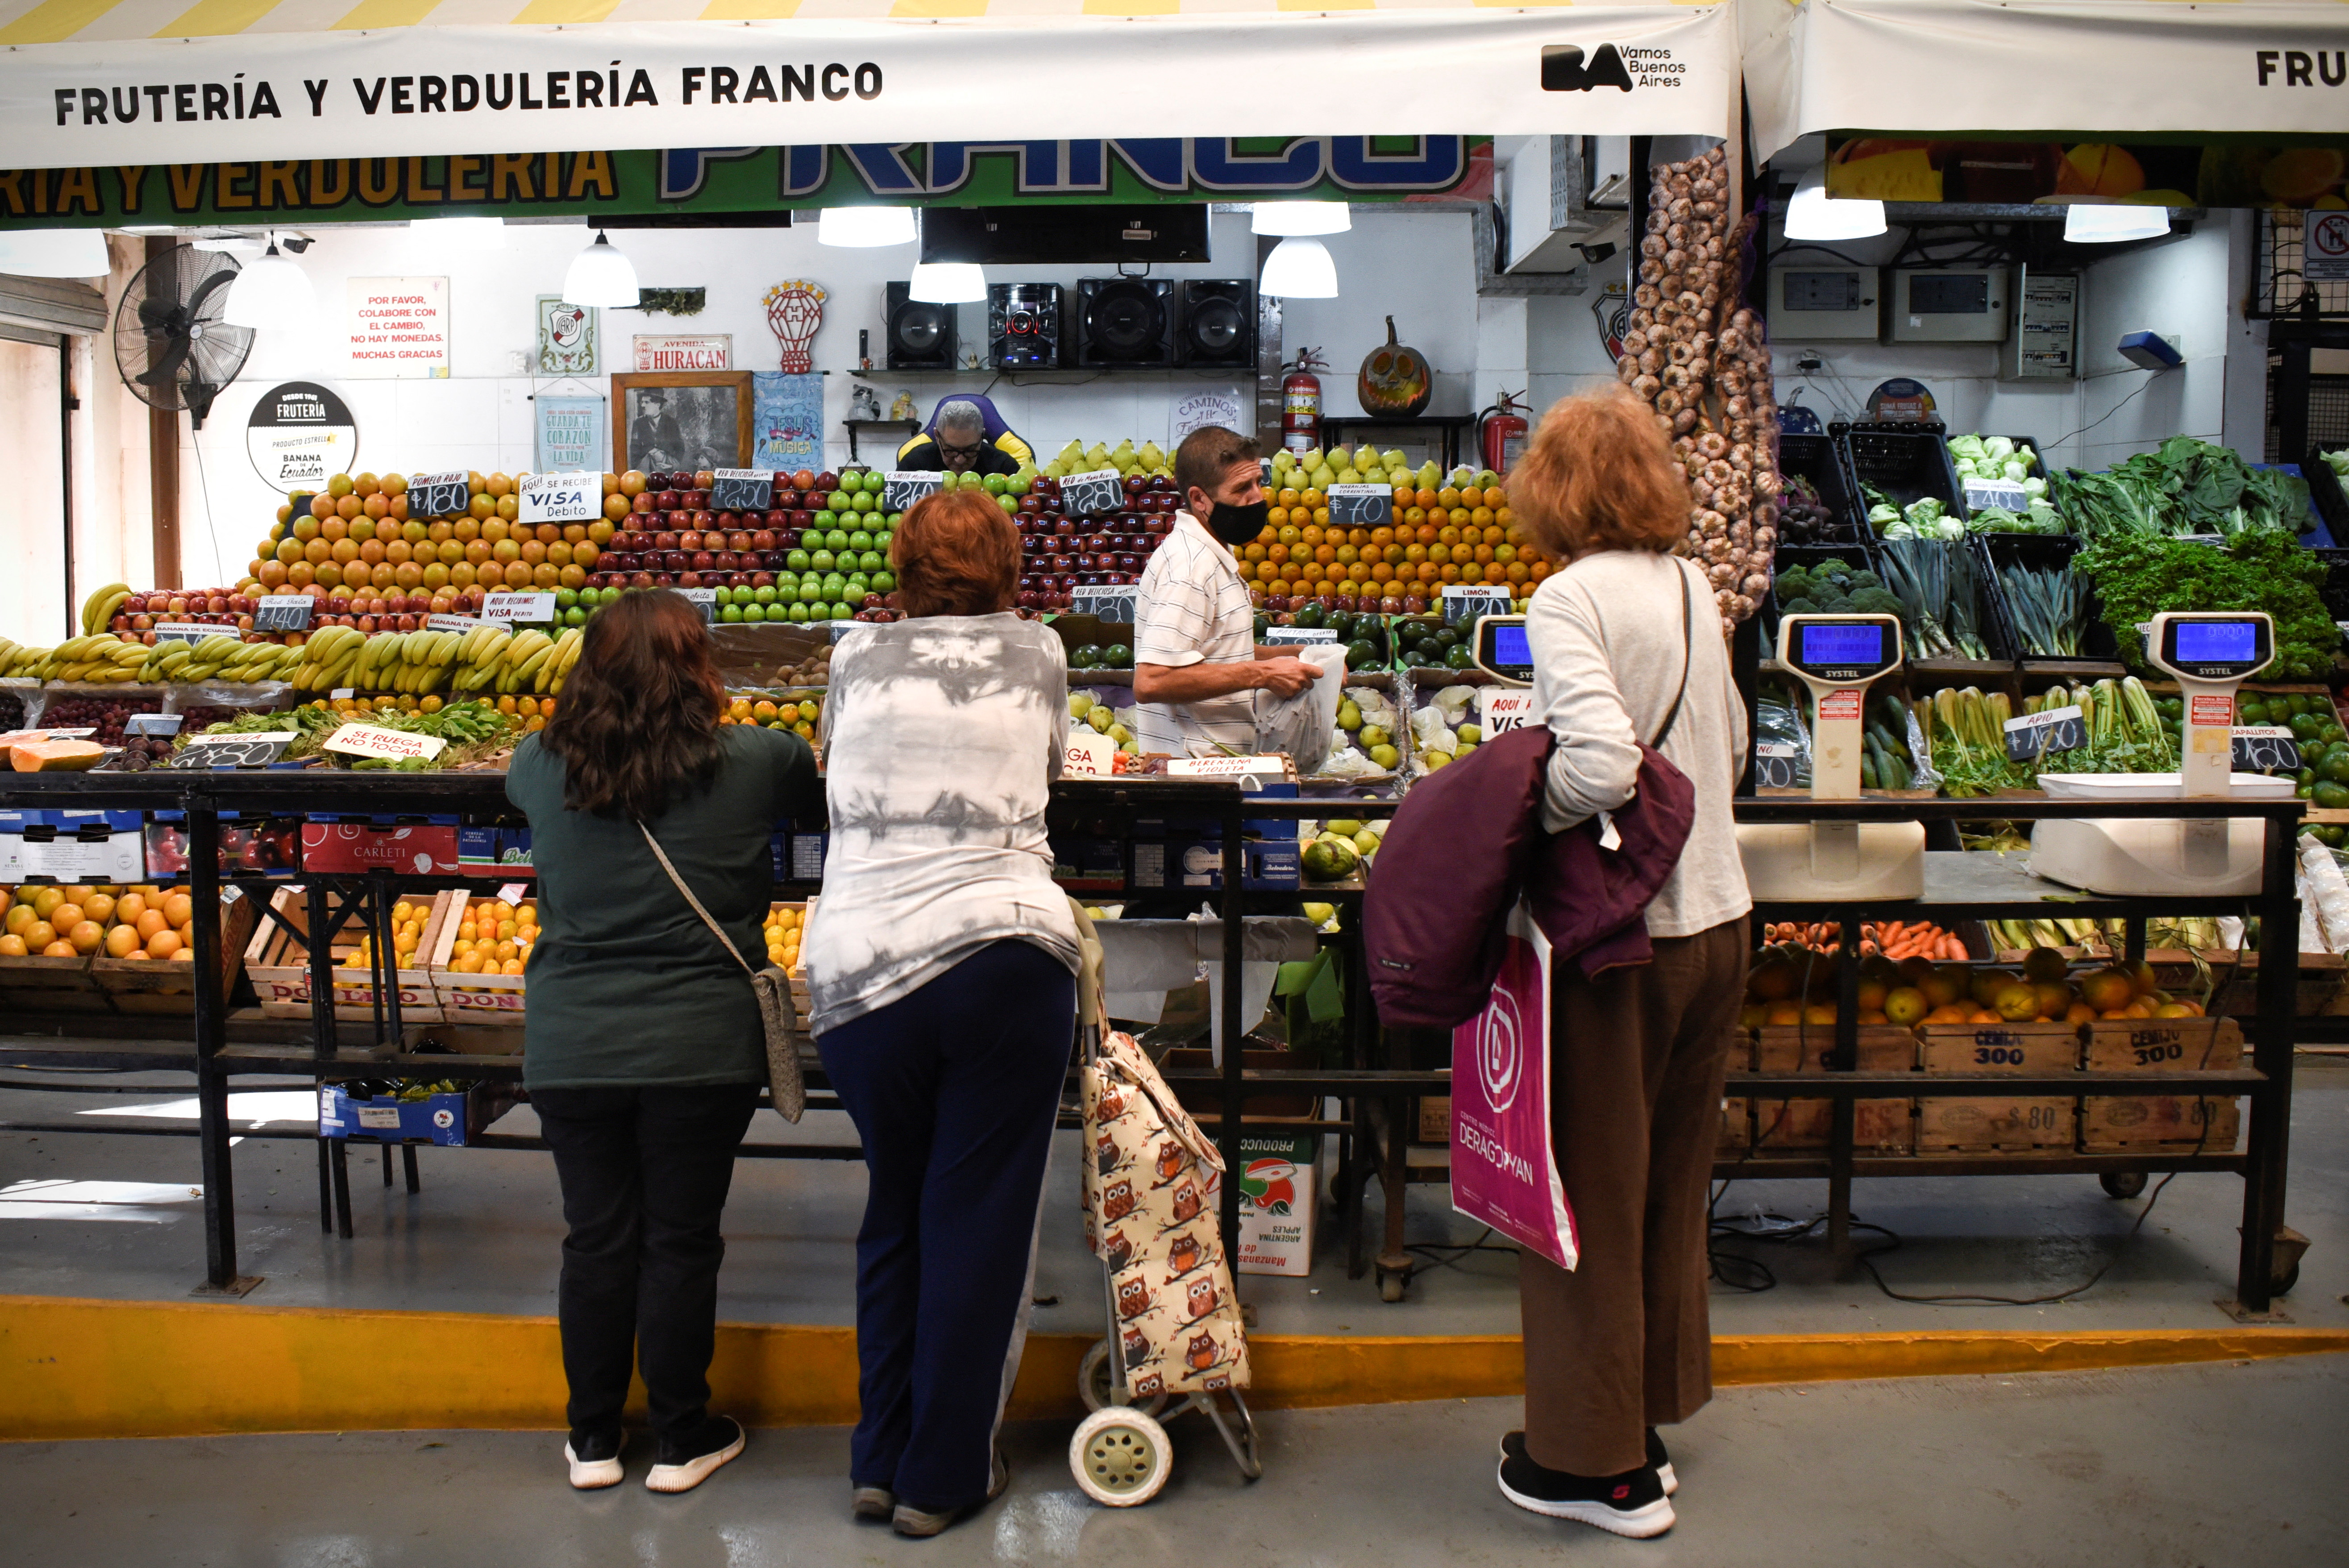 Argentina inflation soars to highest level in years, in Buenos Aires